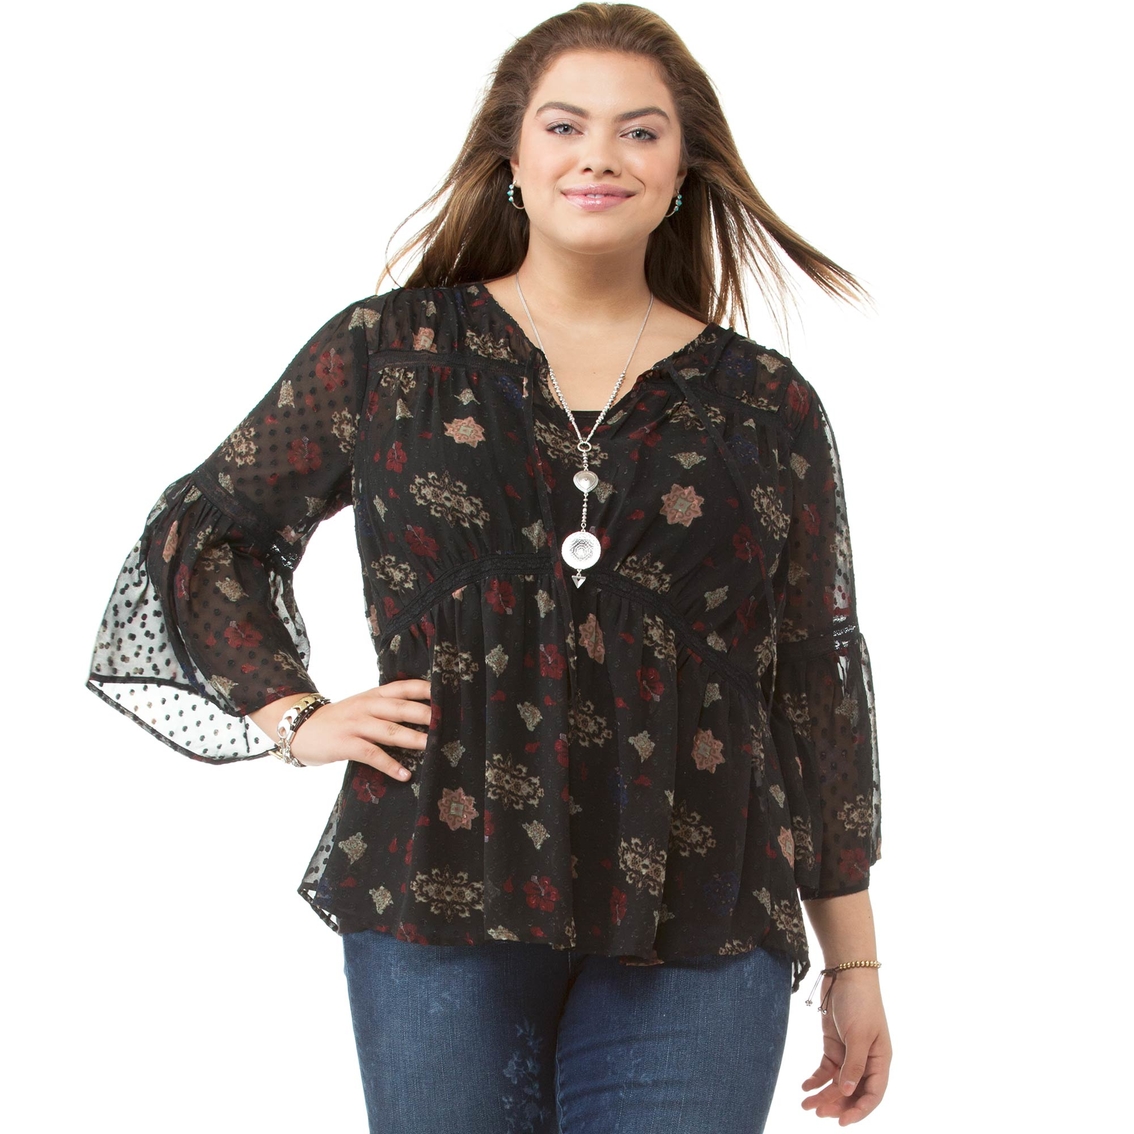 Lucky Brand Plus Size Swiss Dot Floral Top, Tops, Clothing & Accessories